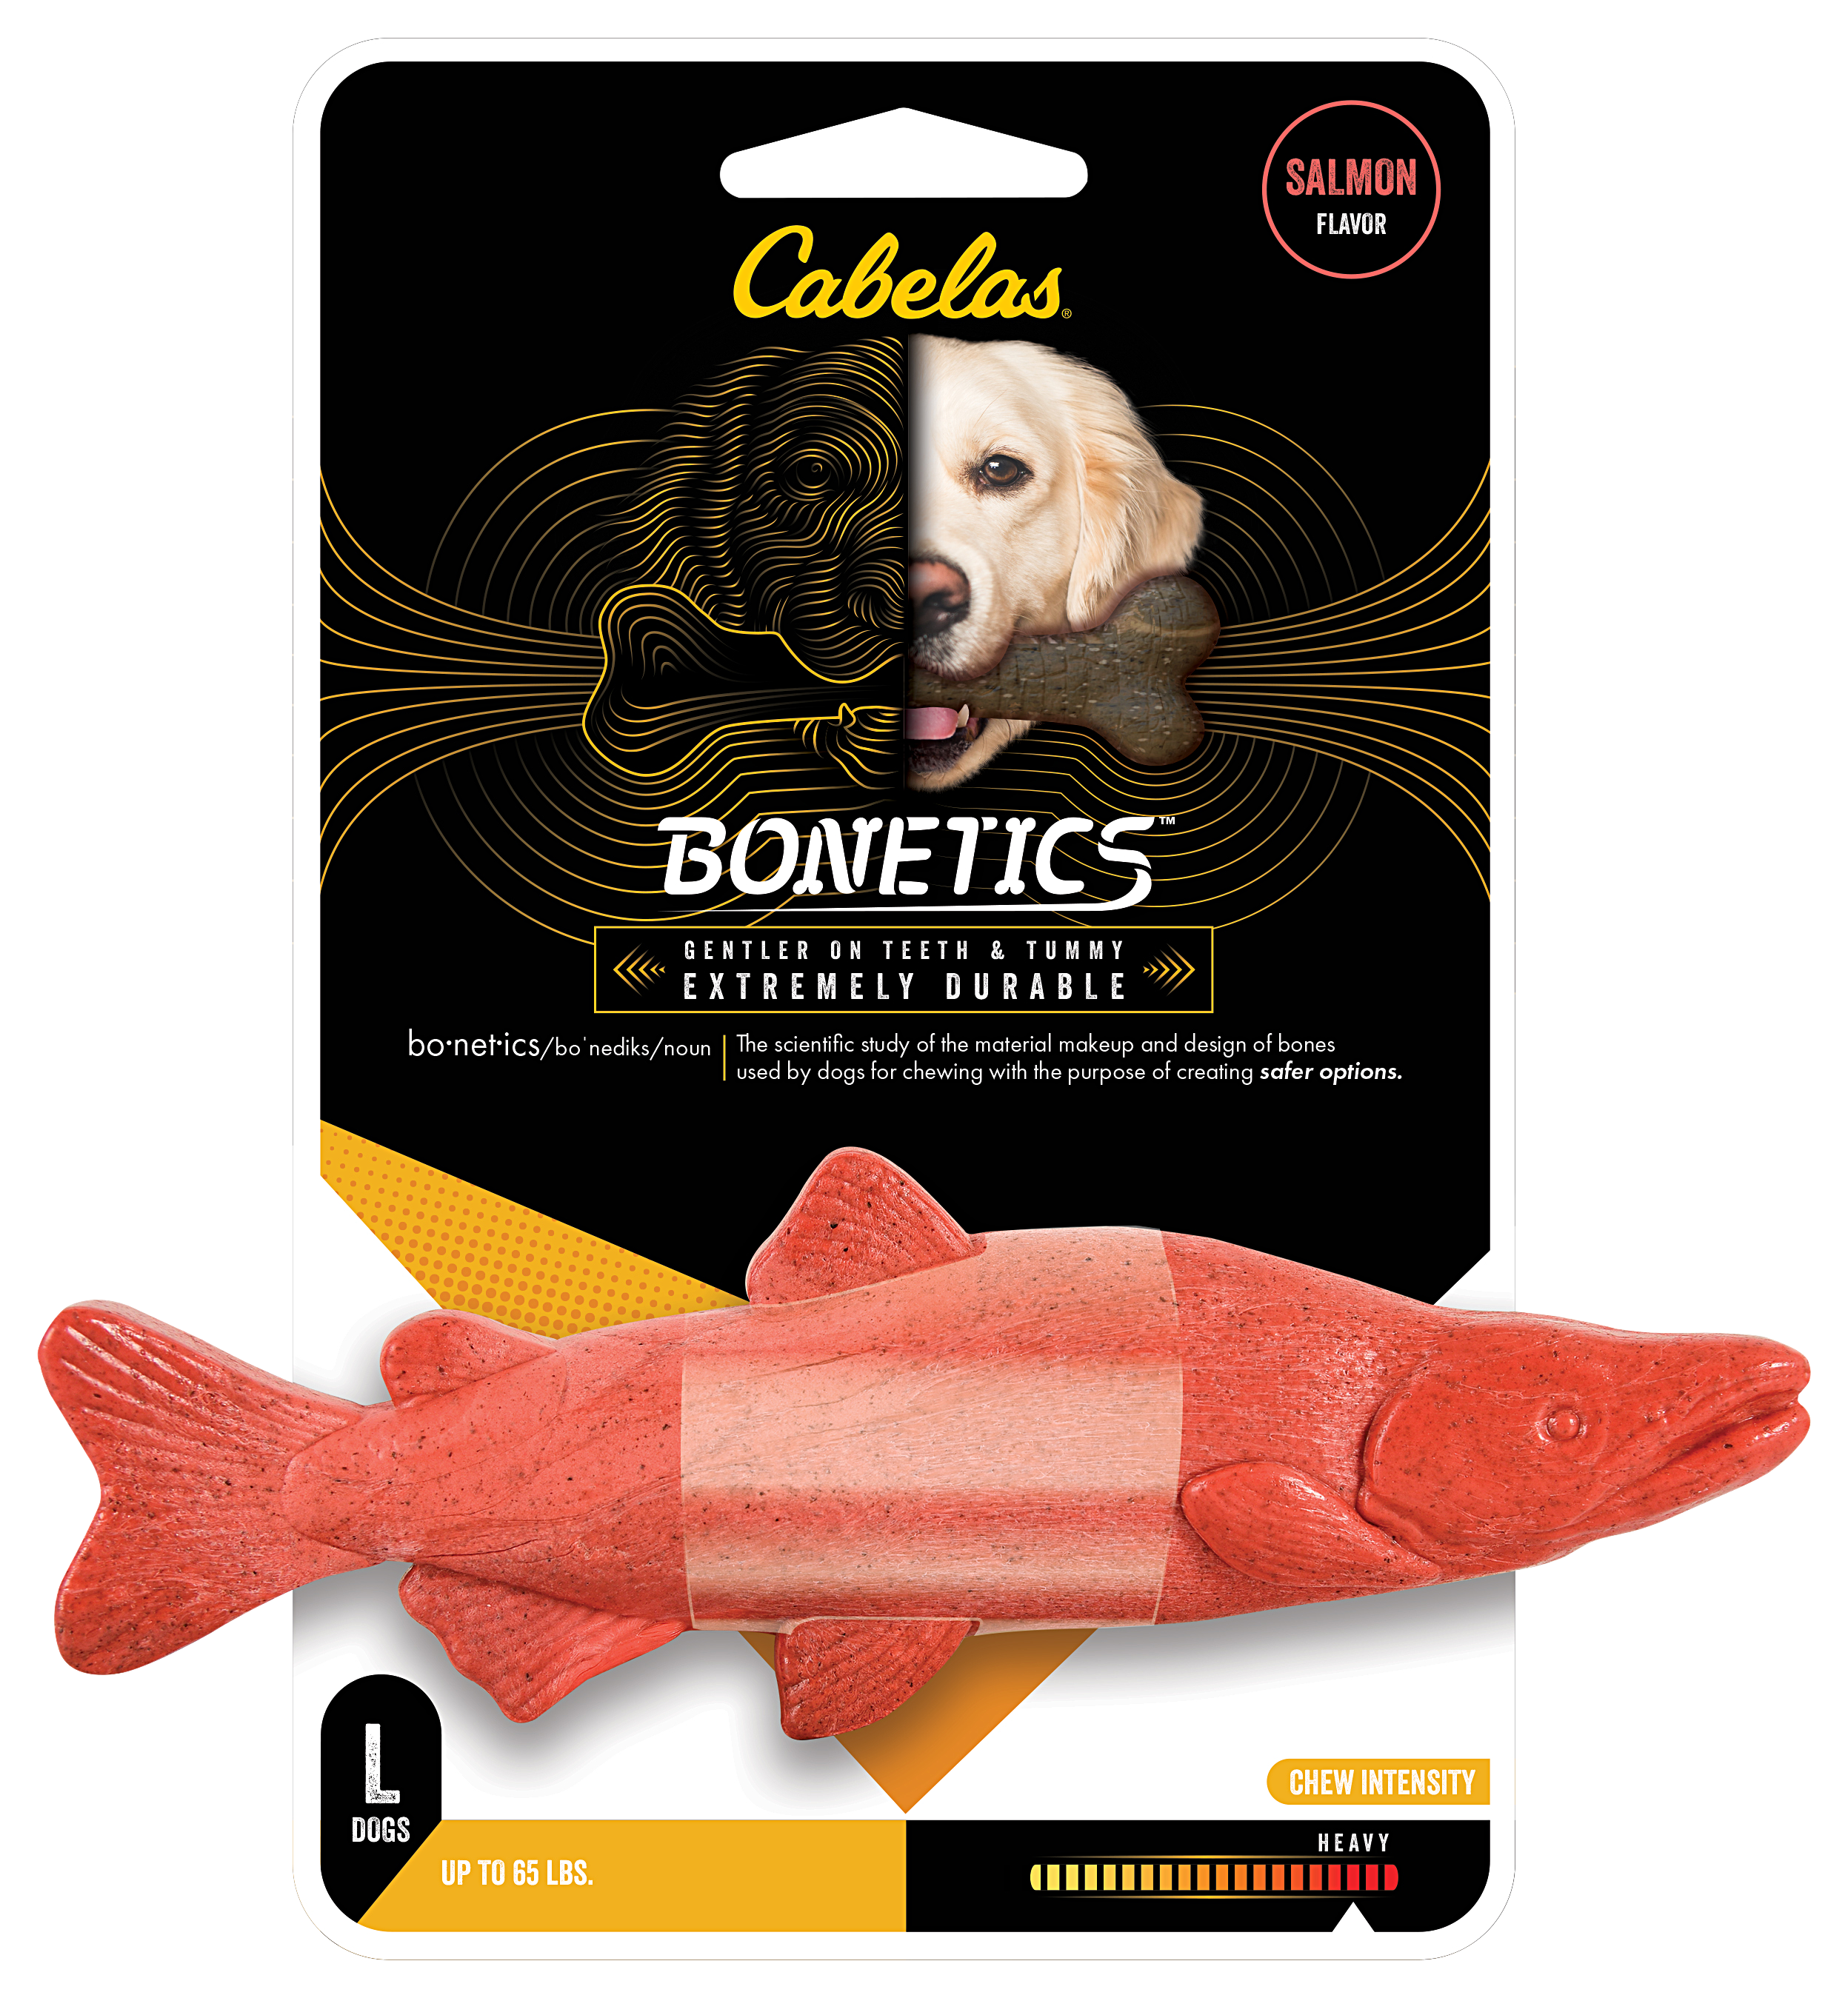 Cabela's Bonetics Large Salmon-Flavored Fish Chew Toy for Dogs